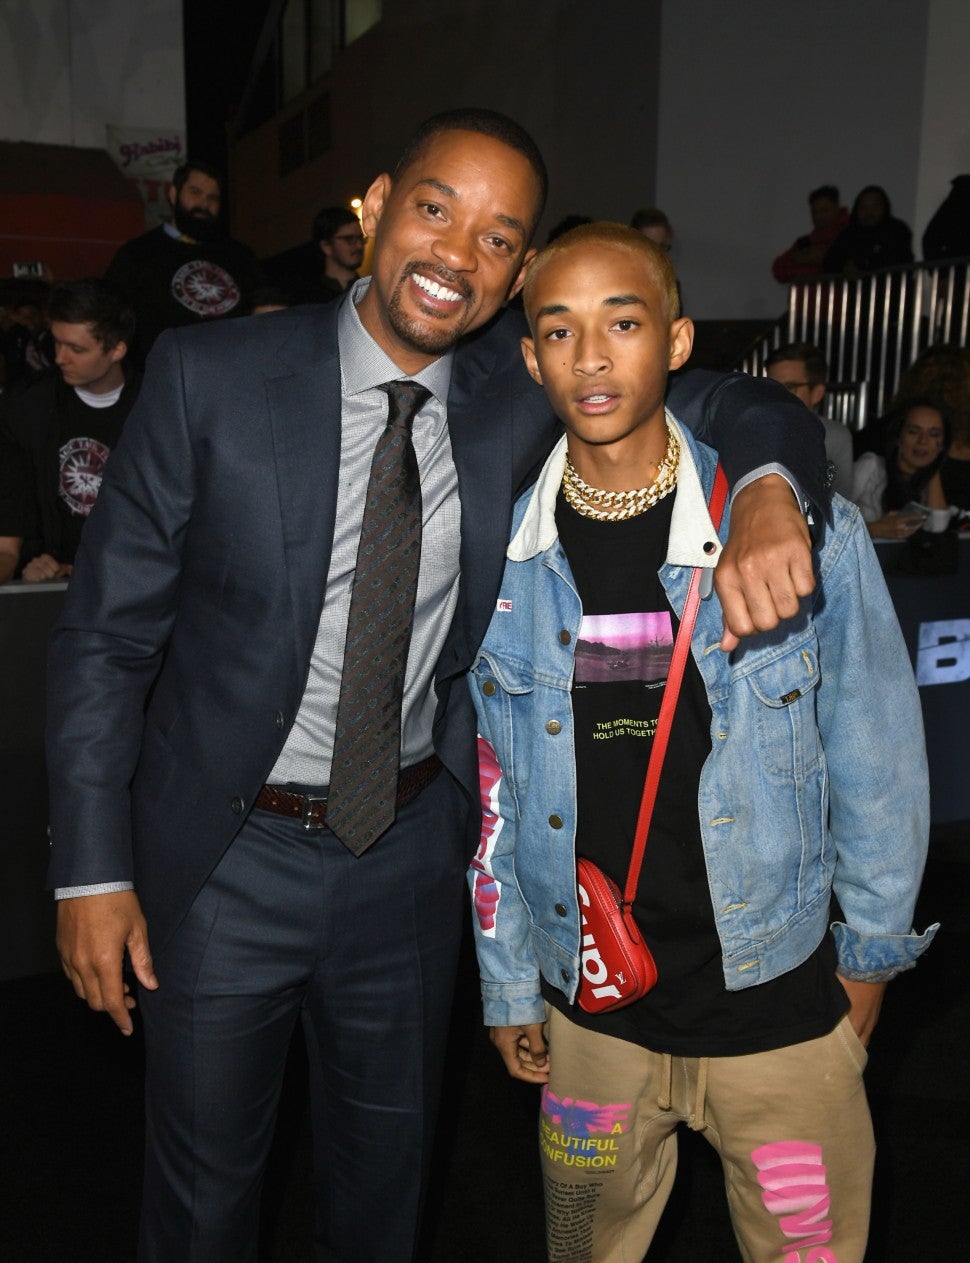 Will Smith and Jaden Smith at Bright premiere